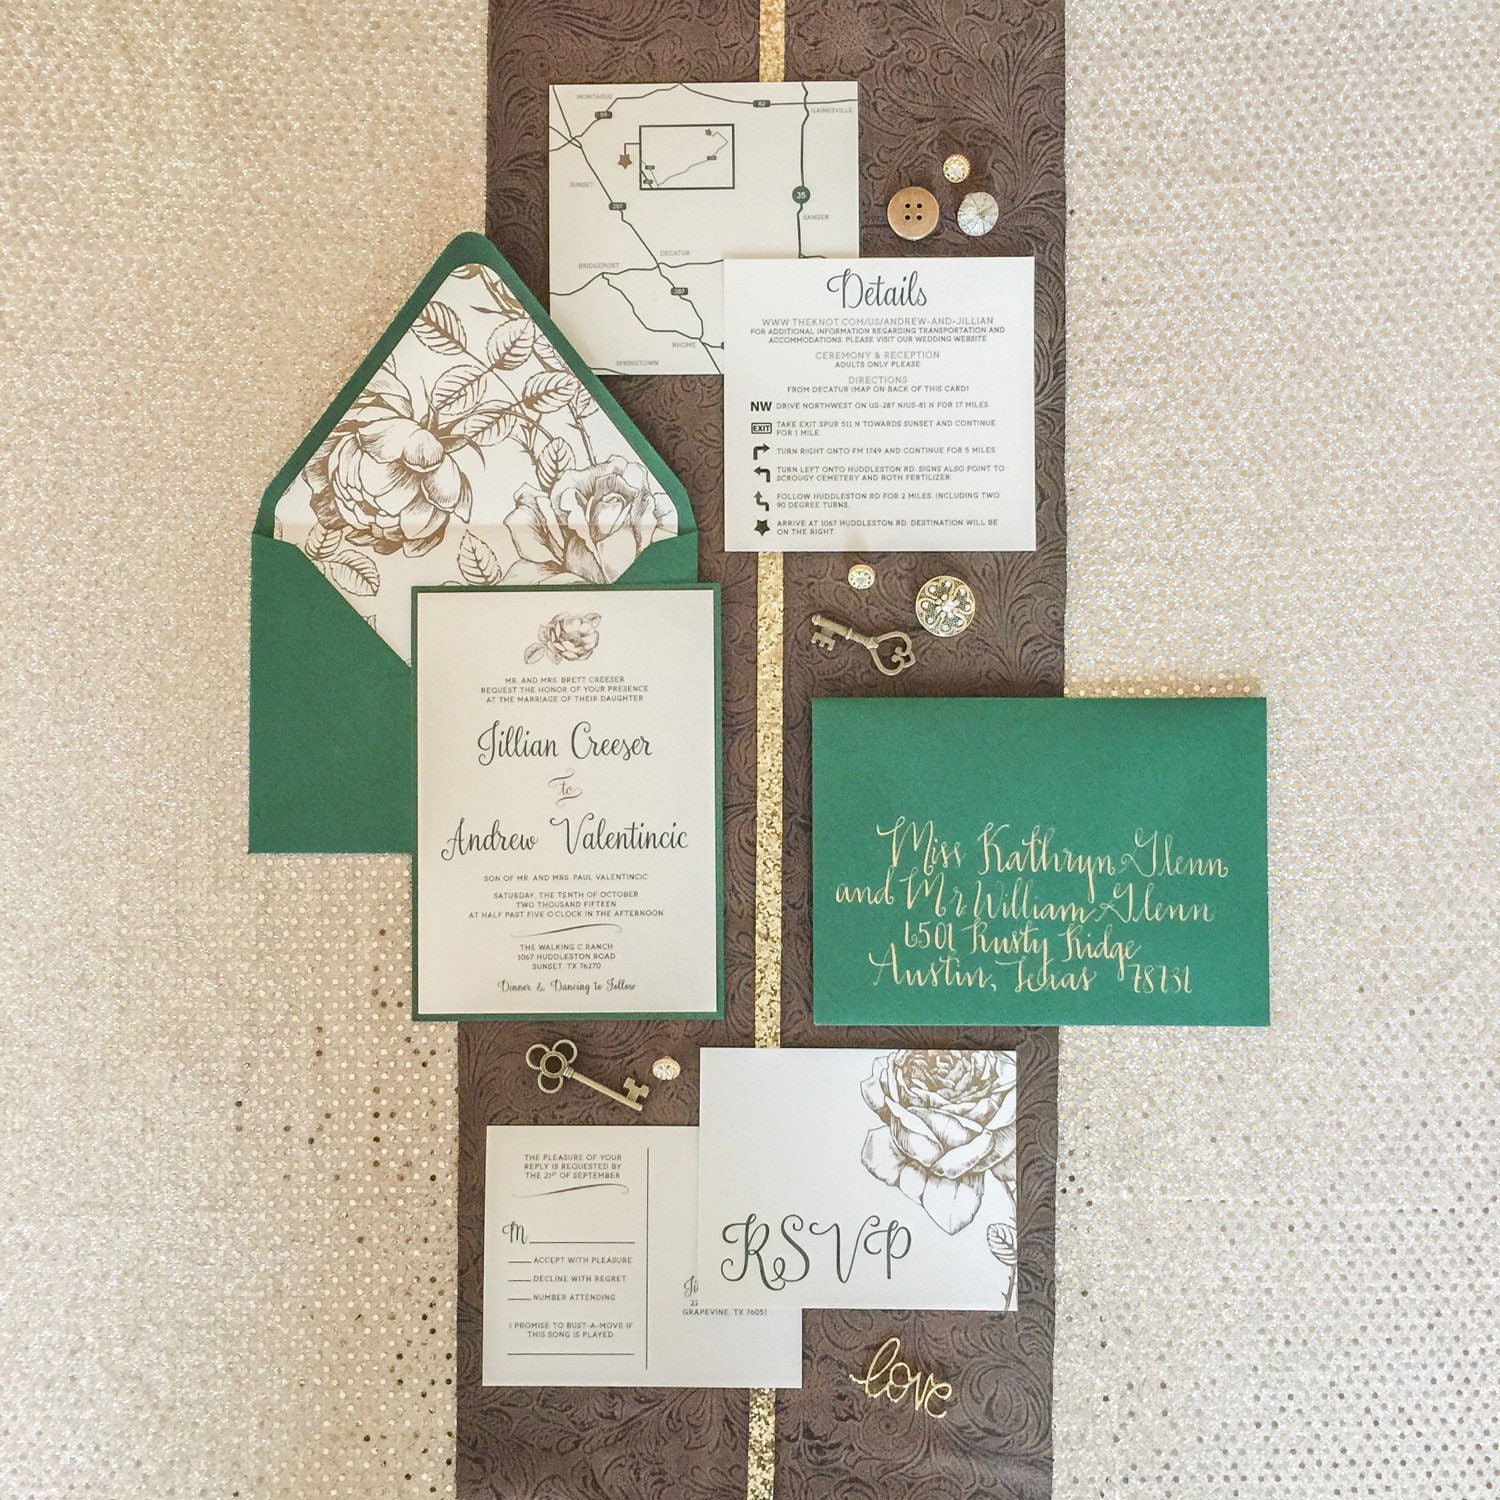 SAMPLE 5x7 Metallic Gold Floral & Forest Green Wedding Invitation with  Directions Insert, Postcard RSVP and Envelope Liner